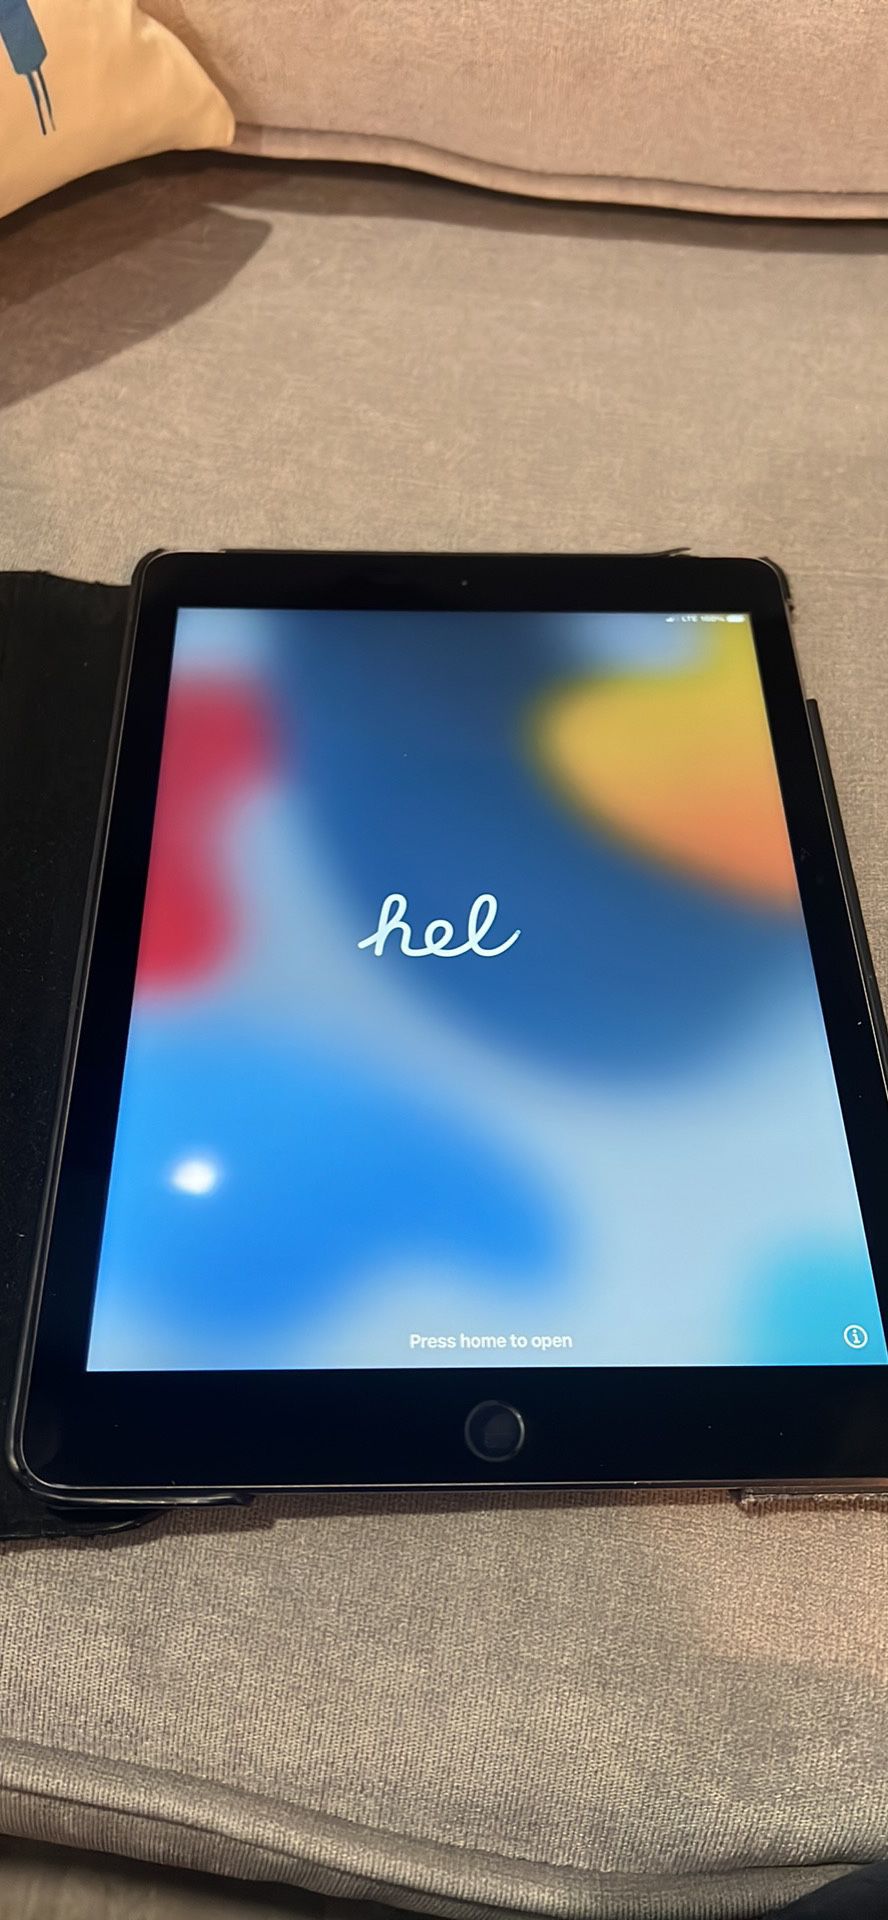 Apple iPad Air 2 gb Space Gray Wi Fi + Cellular for Sale in